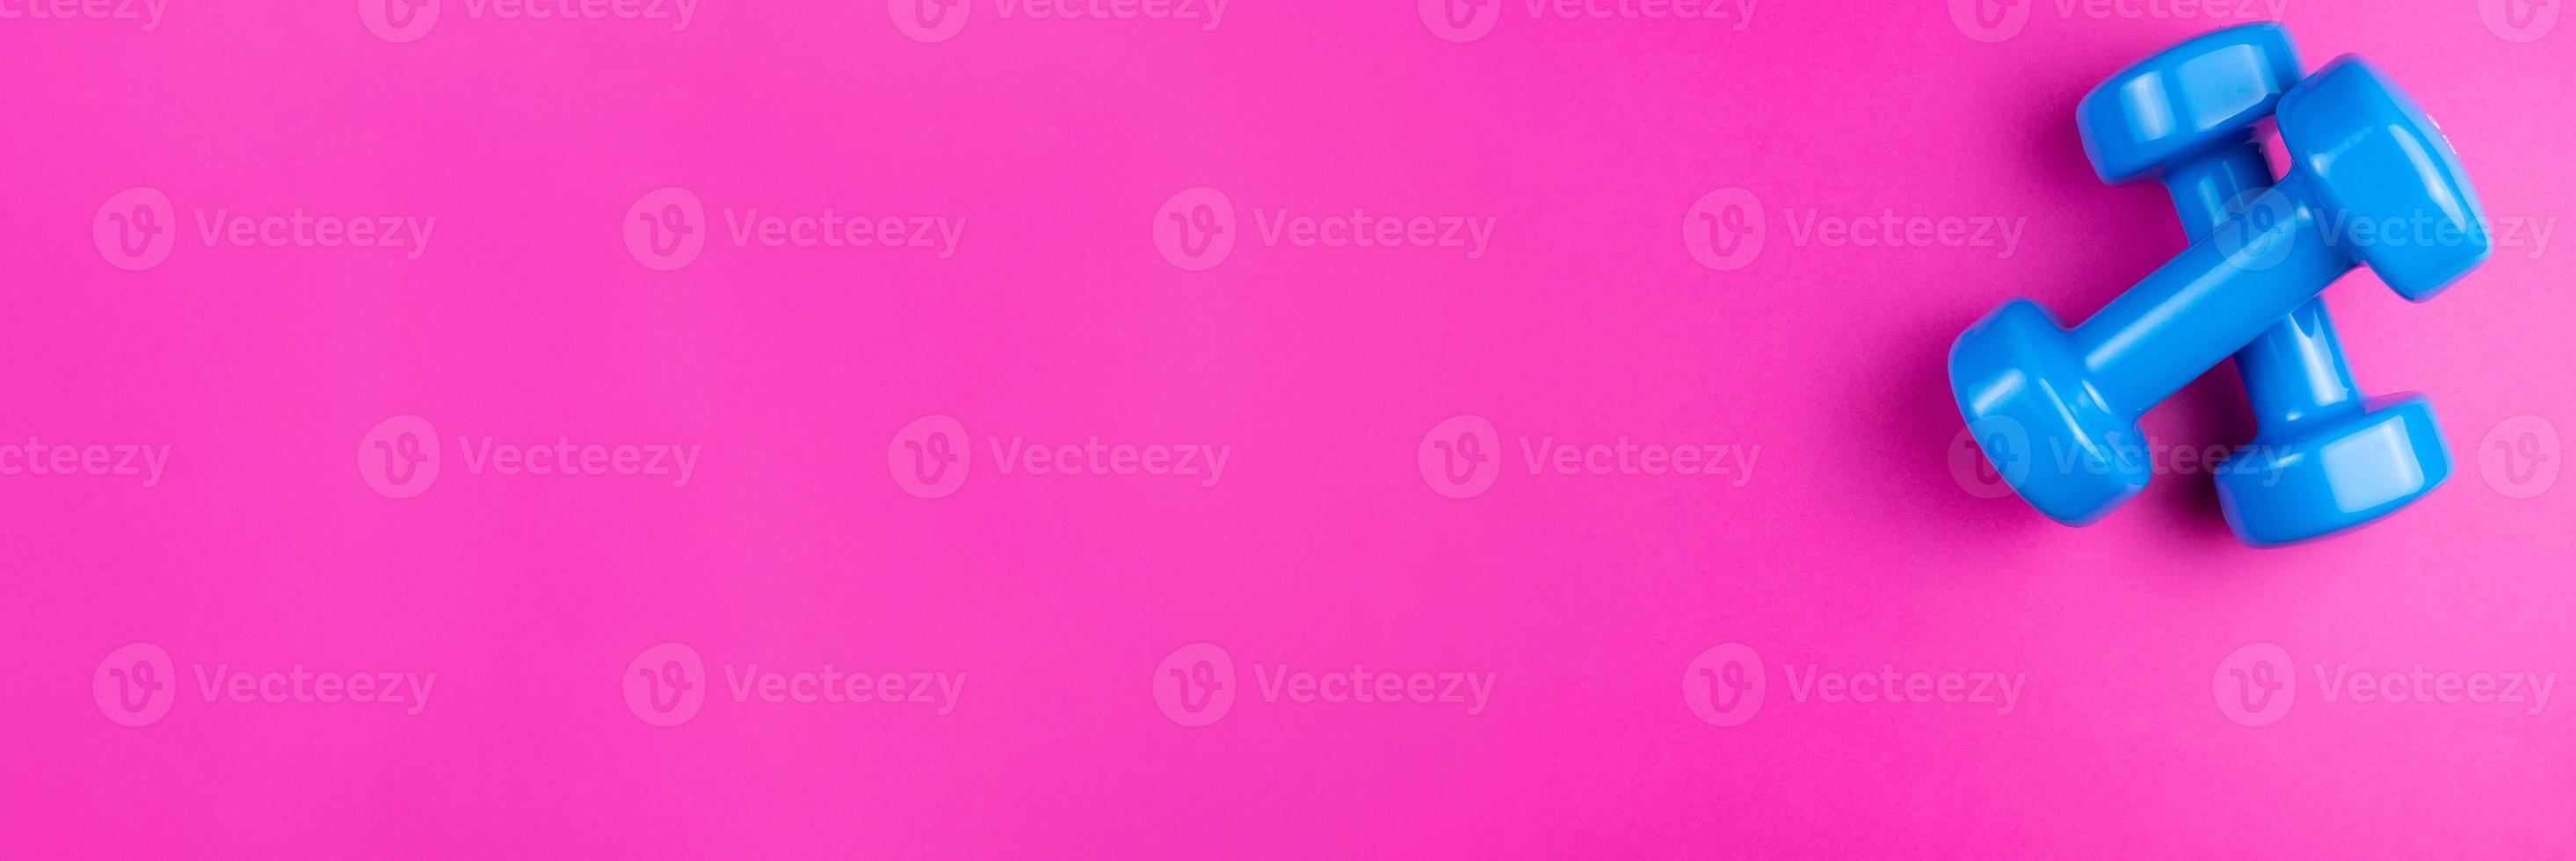 dumbbells on a pink background photo